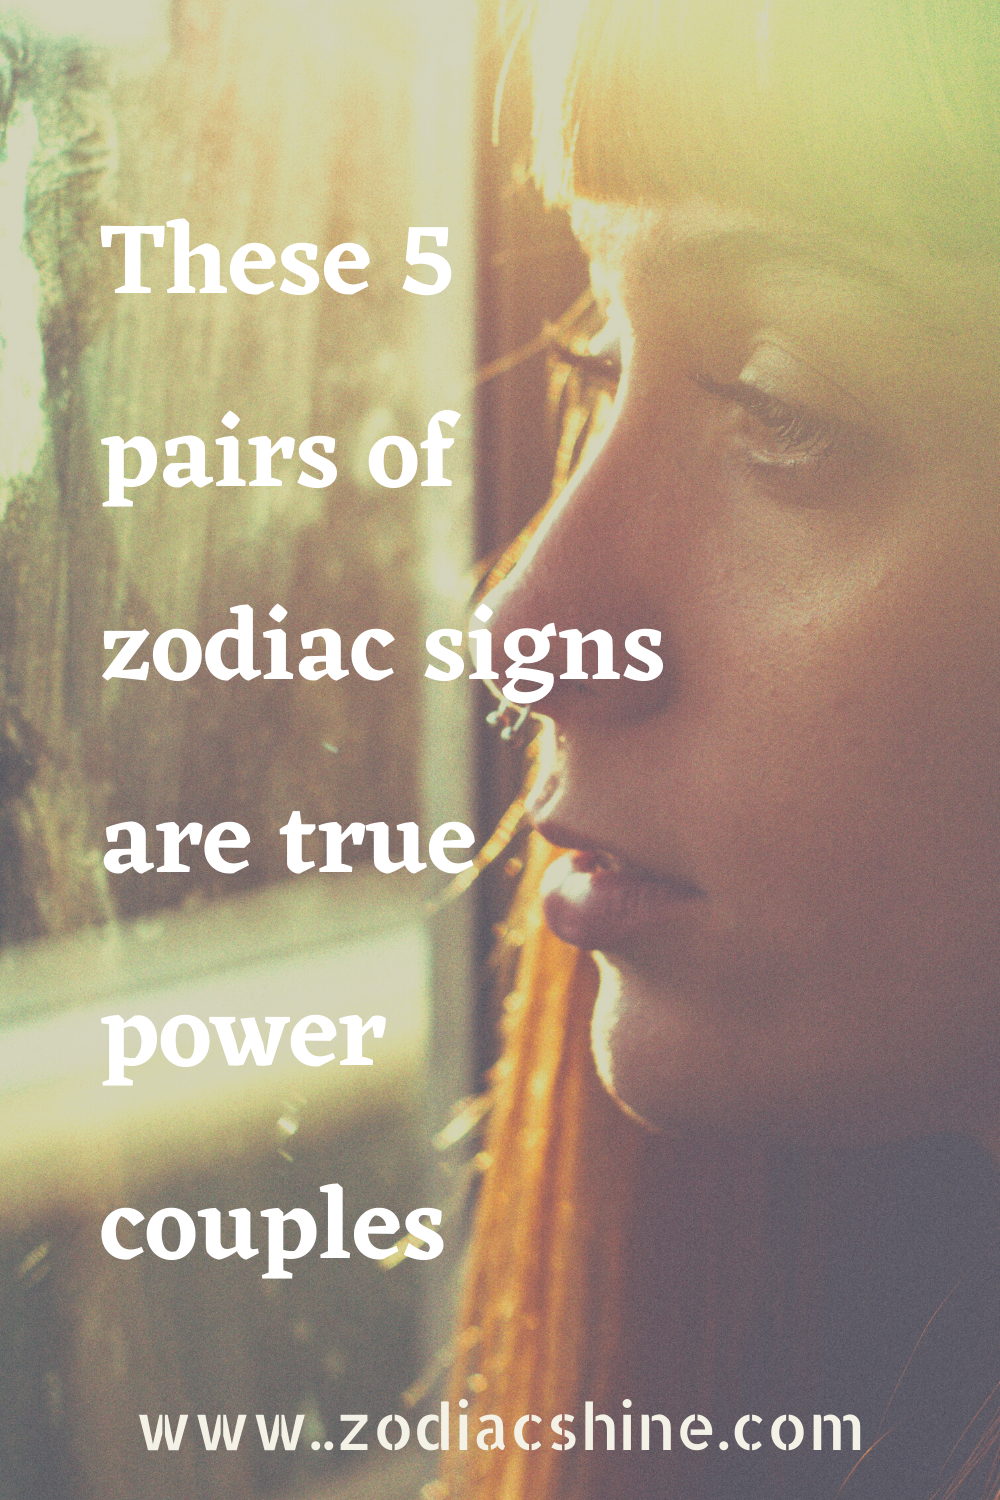 These 5 pairs of zodiac signs are true power couples